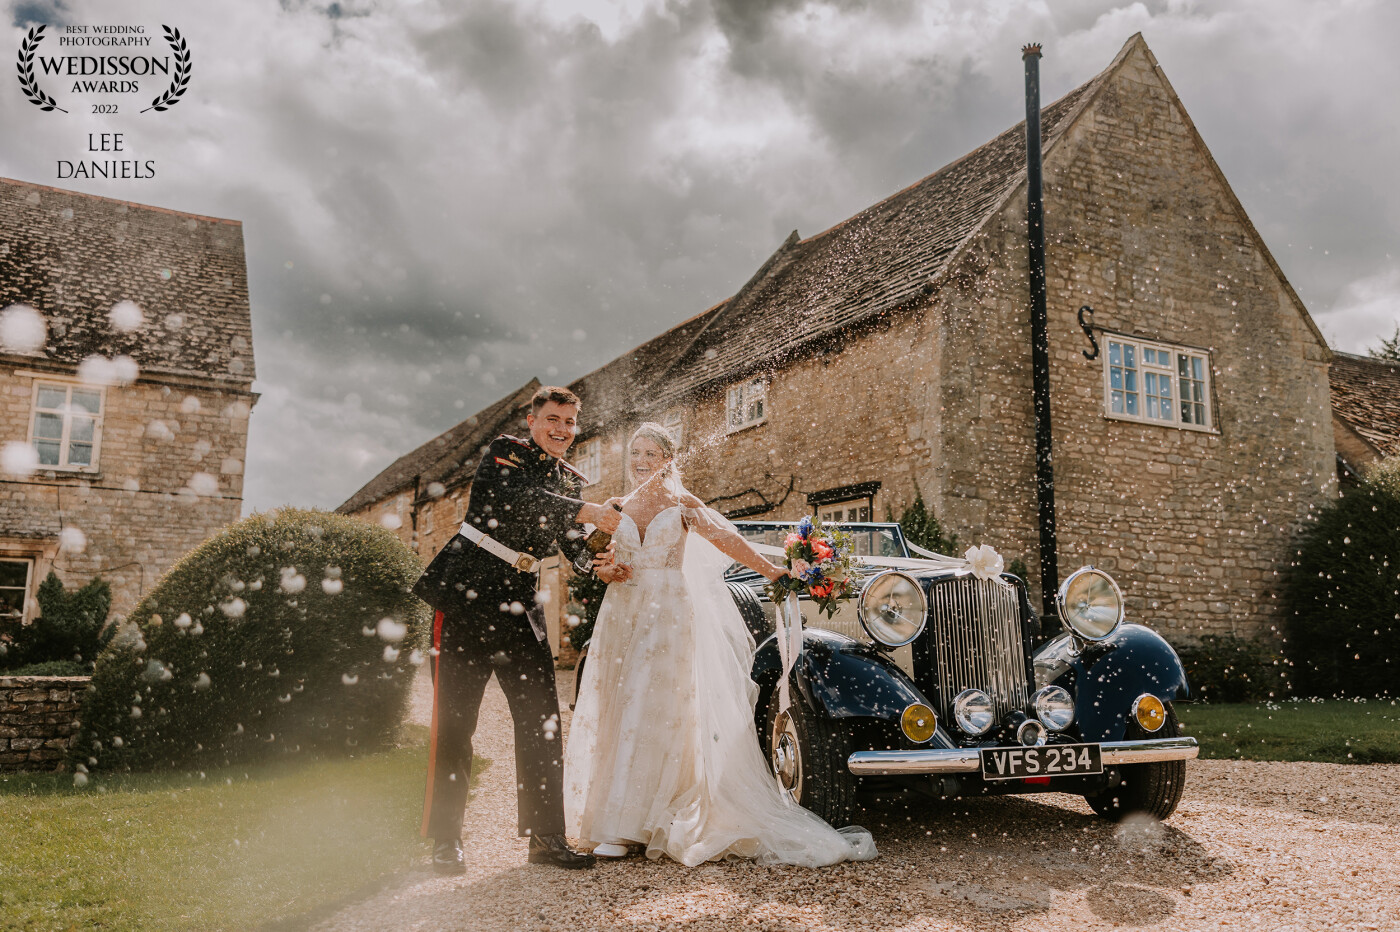 This was such a great wedding, Samantha & Lucas where up for having a laugh, so we cracked a bottle and gave it a shake!! <br />
<br />
Venue - Sibson Inn